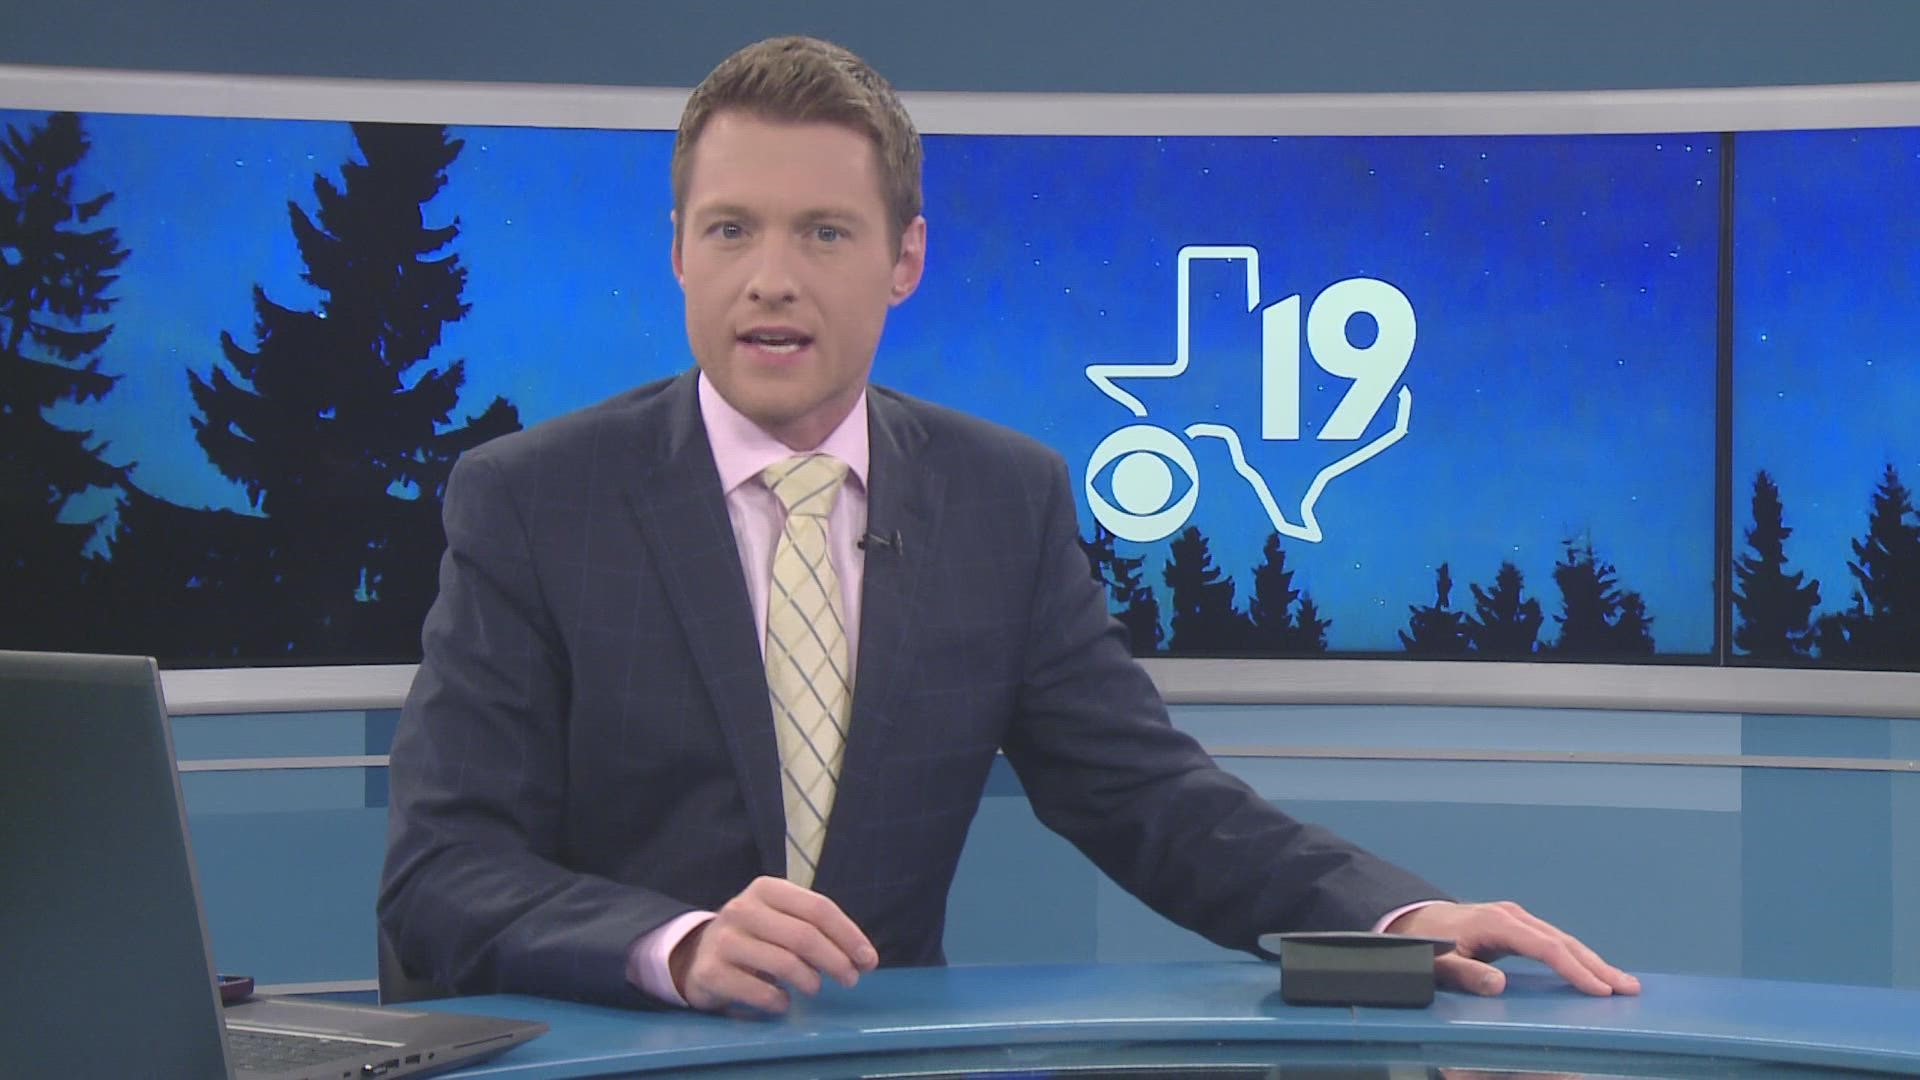 Aaron Baker anchors the 10 p.m. newscast for KYTX CBS19 on June 22, 2022.